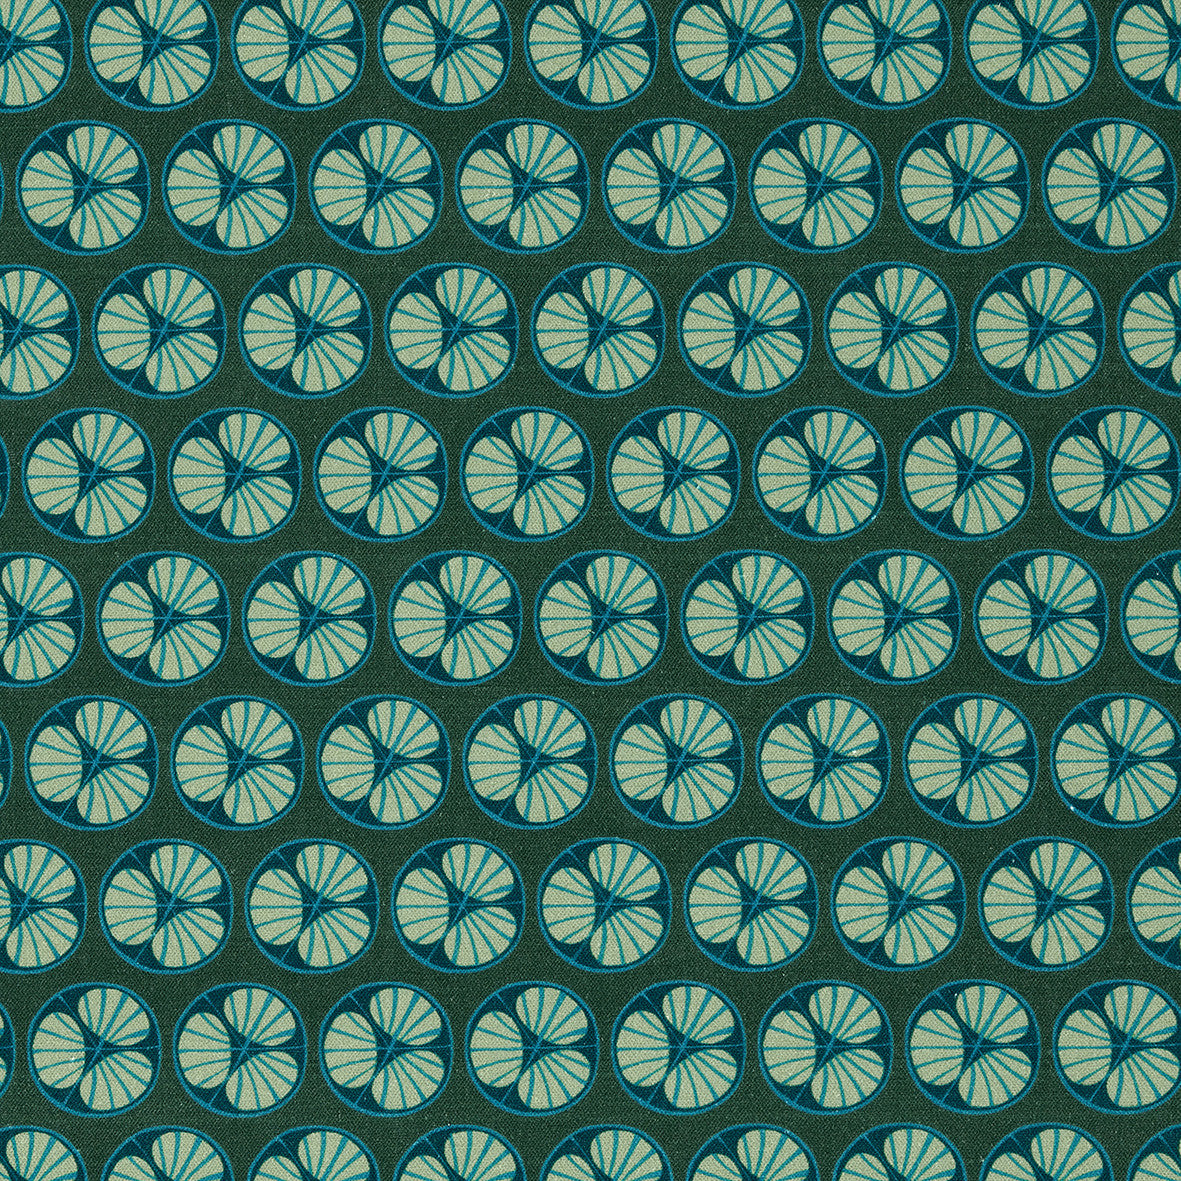 Graphic Cross Section of Fruit Pattern Printed Linen Cotton Canvas Fabric in Dark Moss Green